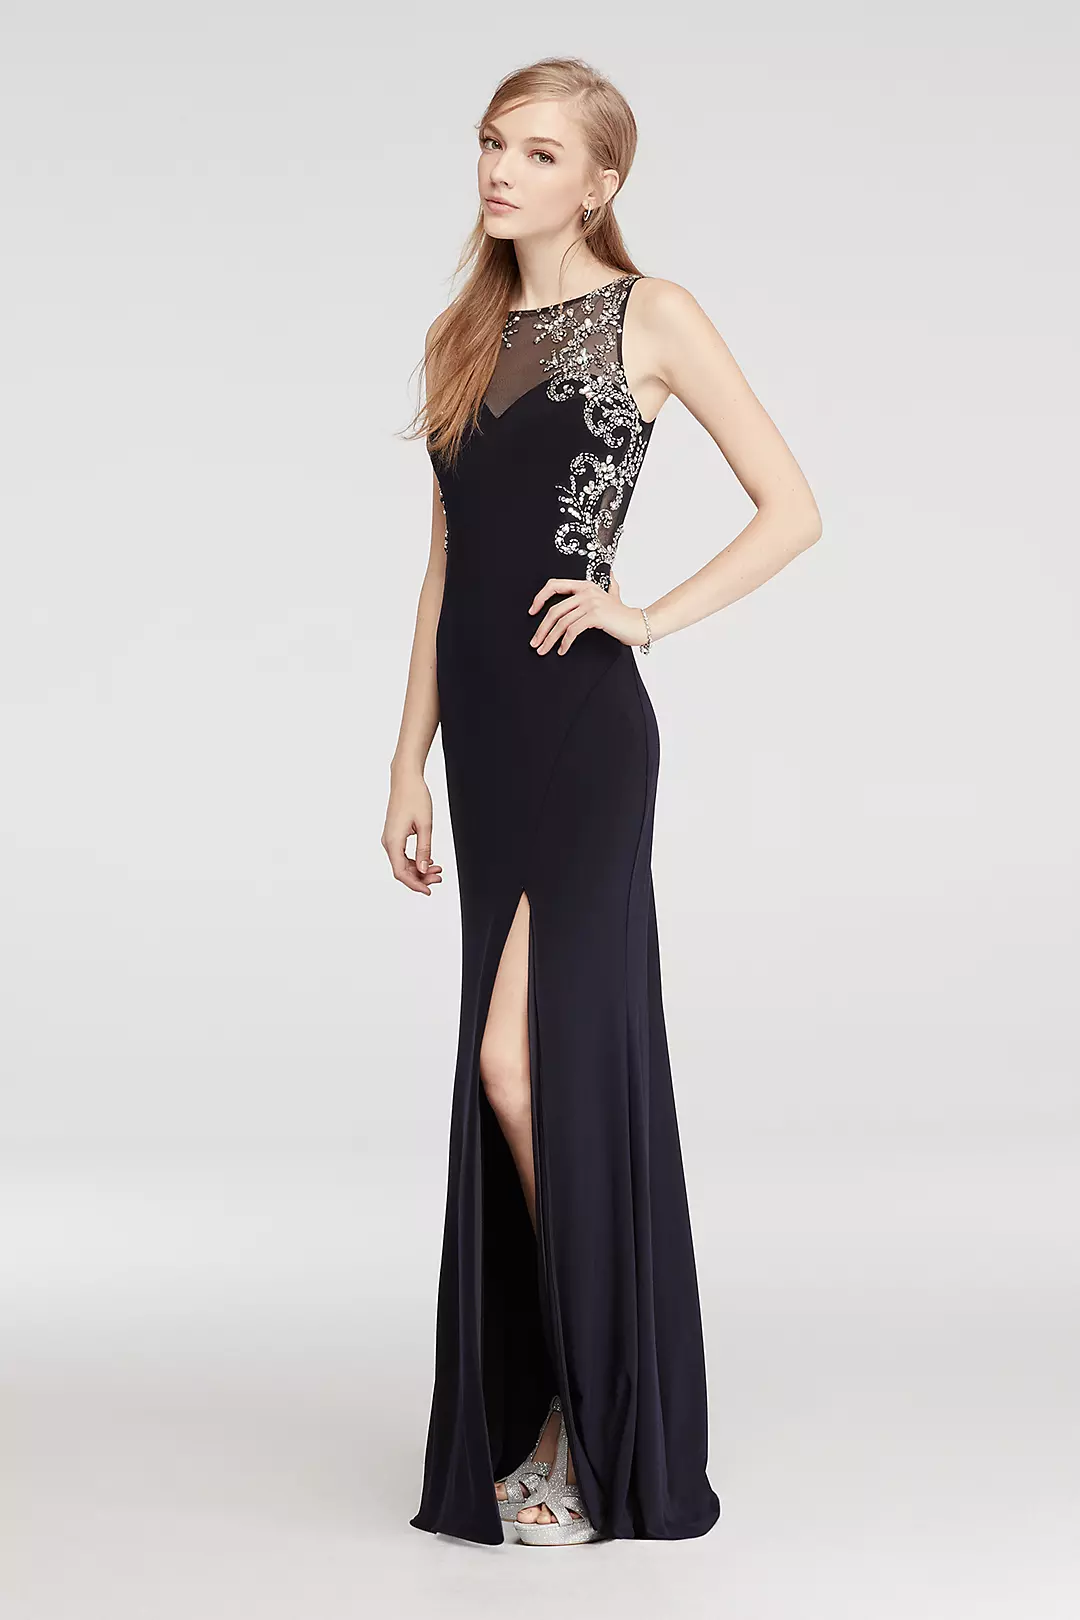 Long Jersey Prom Dress with Illusion Neck and Back Image